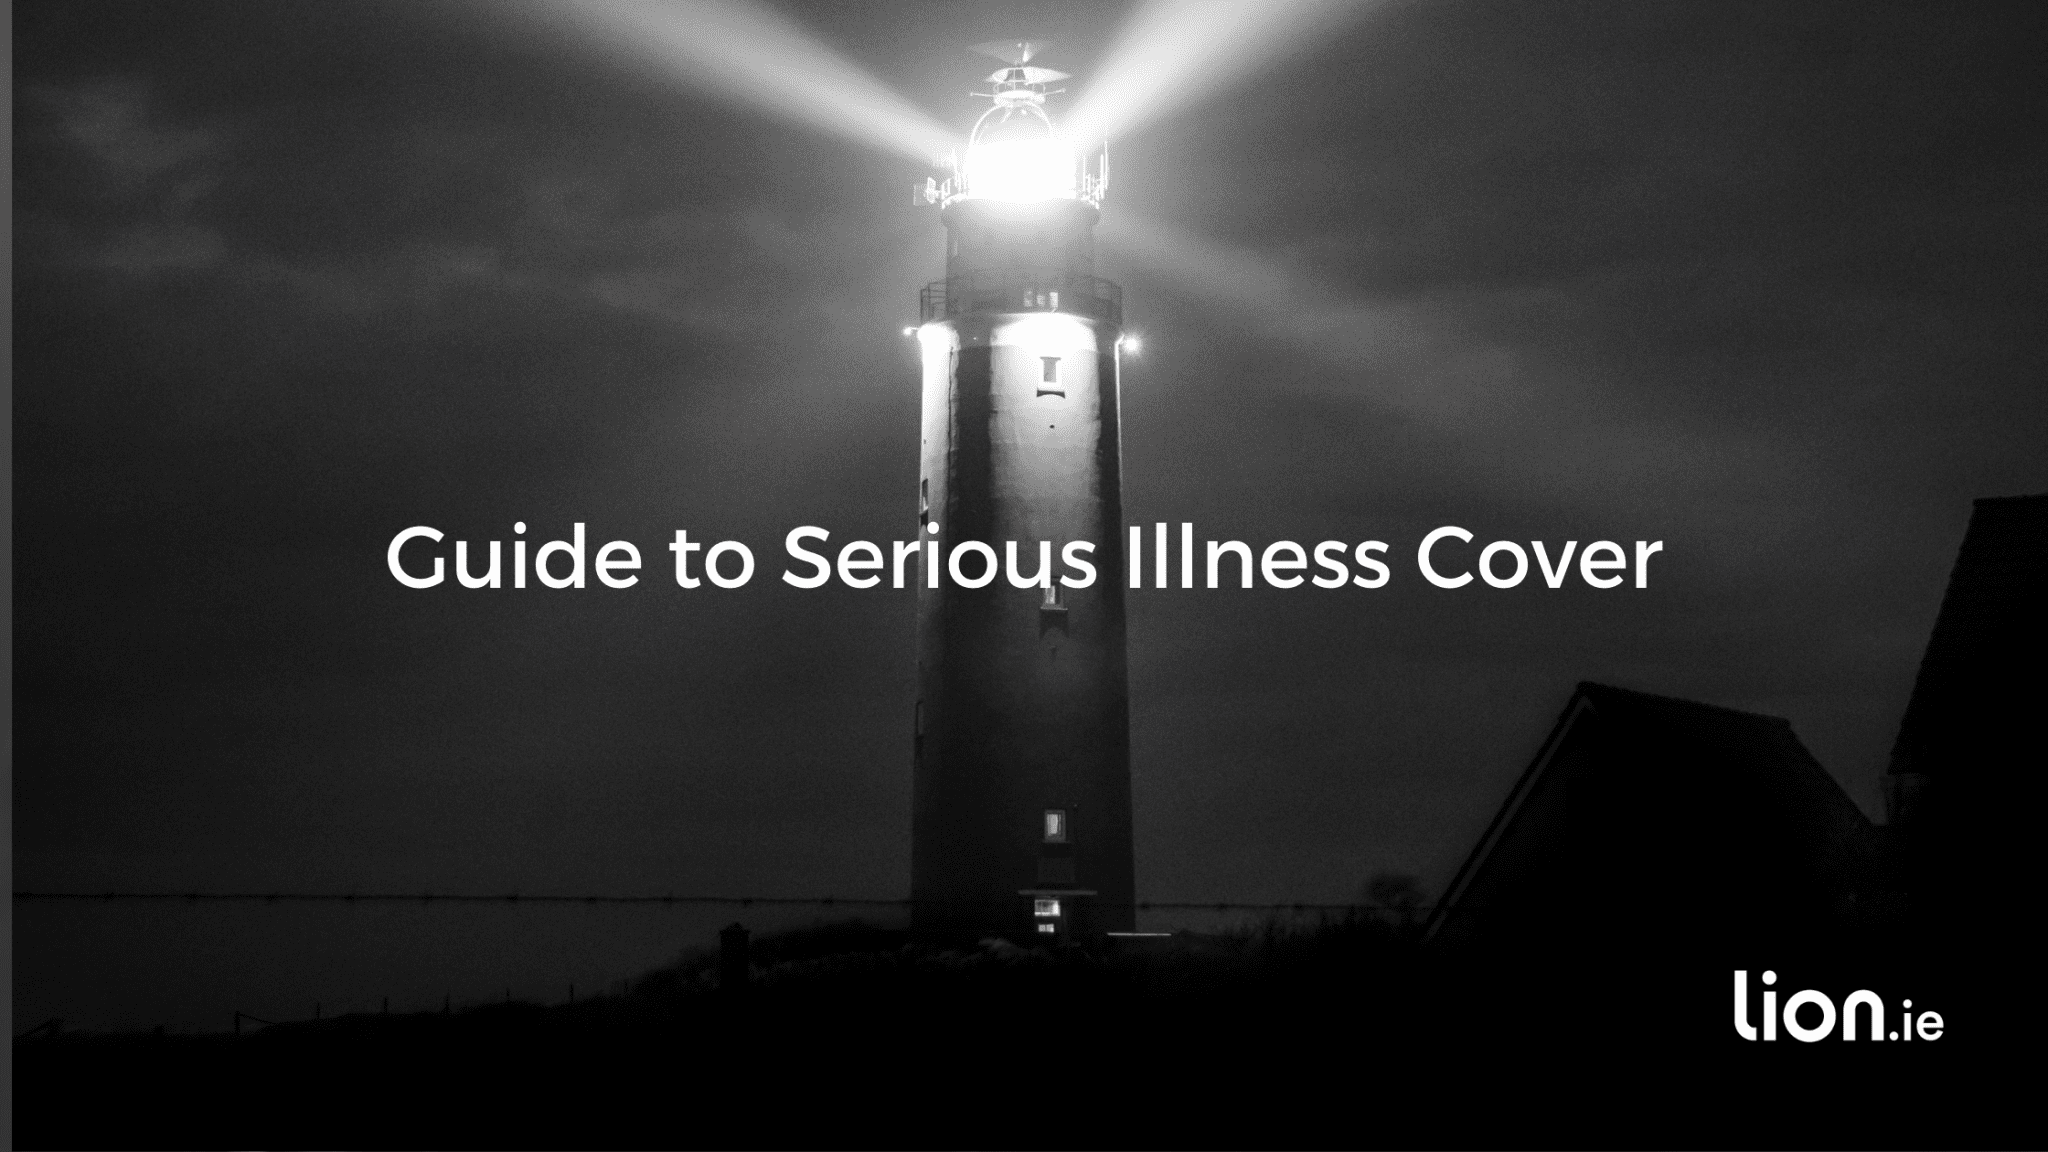 Guide to Serious Illness Cover